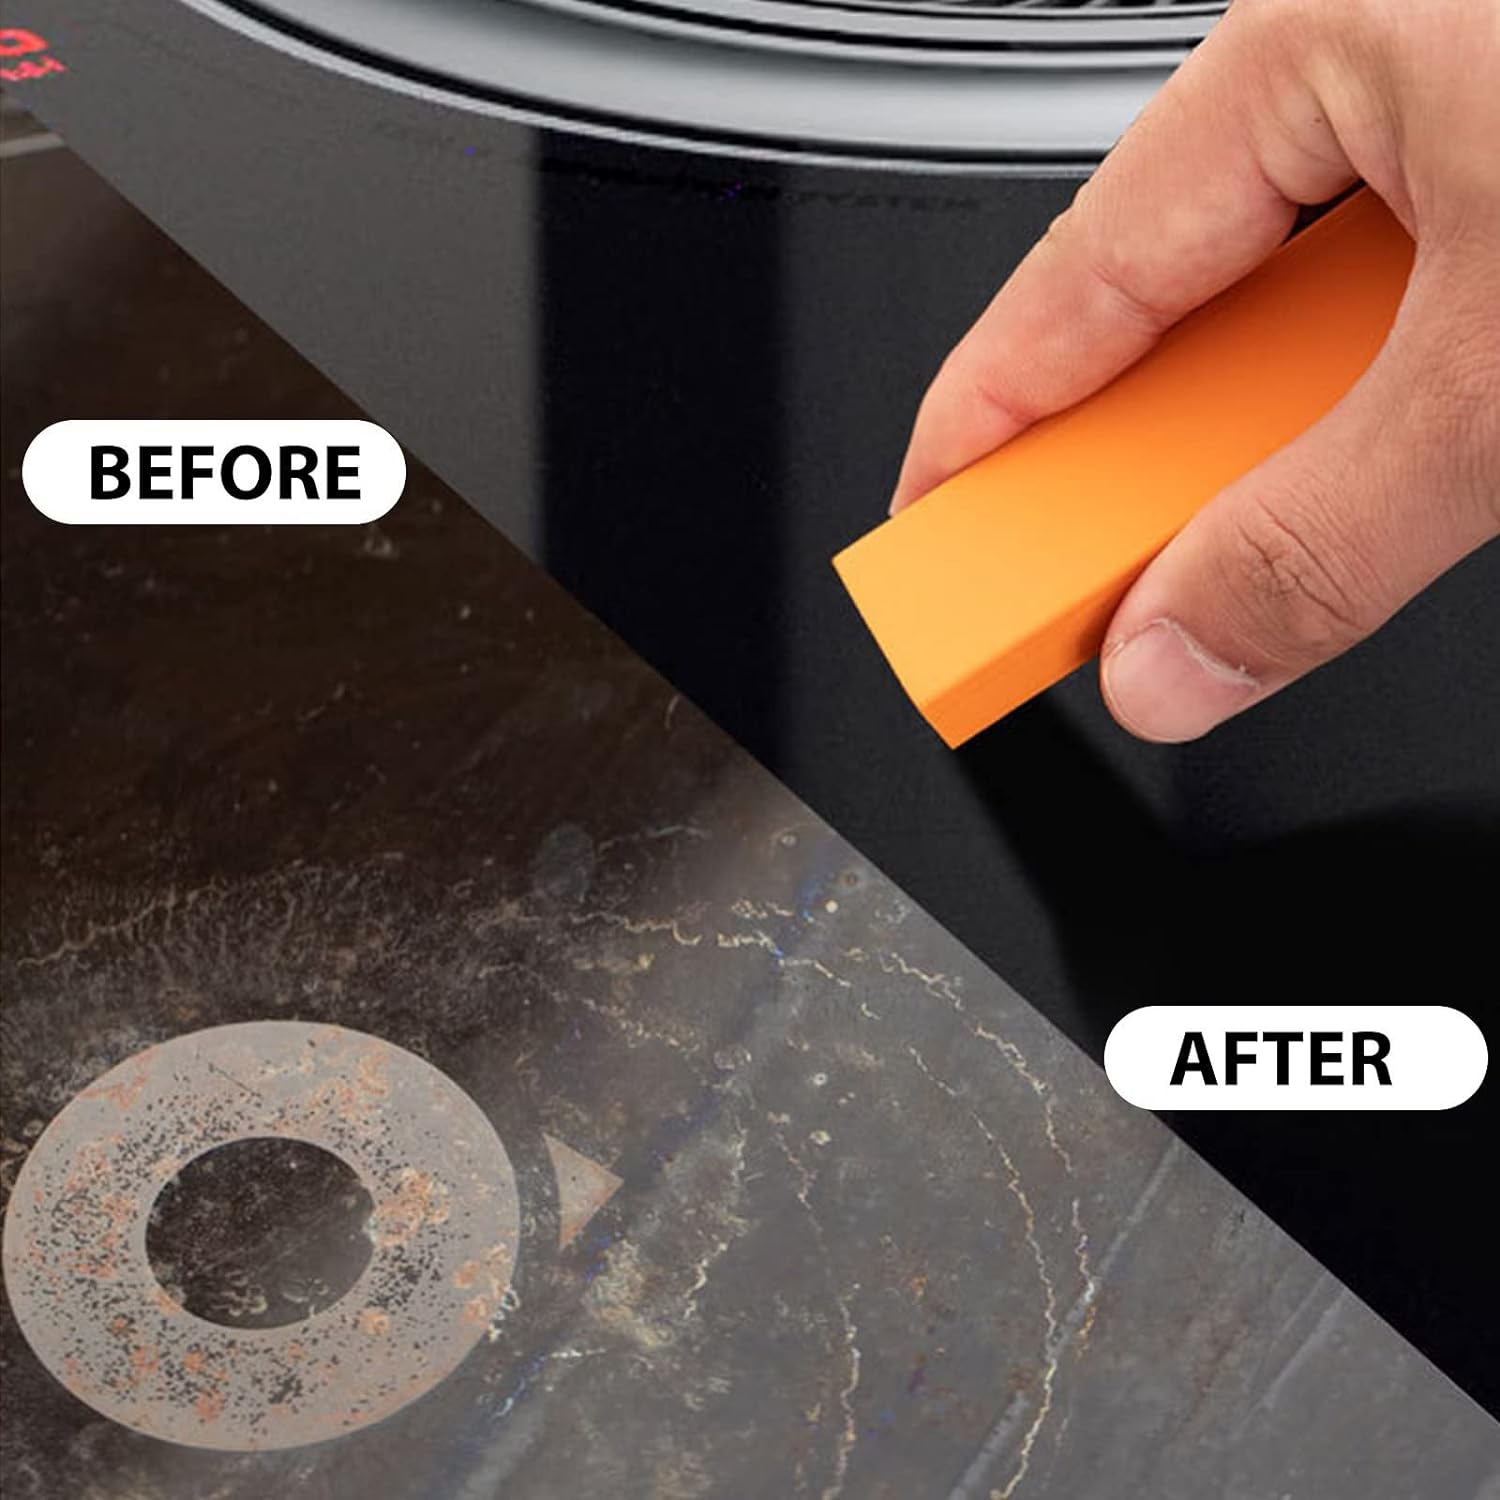 SkyShopy Rust Cleaning Easy Limescale Eraser Artifact, Stainless Steel Stains Eraser Decontamination Cleaner Eraser Rust Remover for Kitchen Home